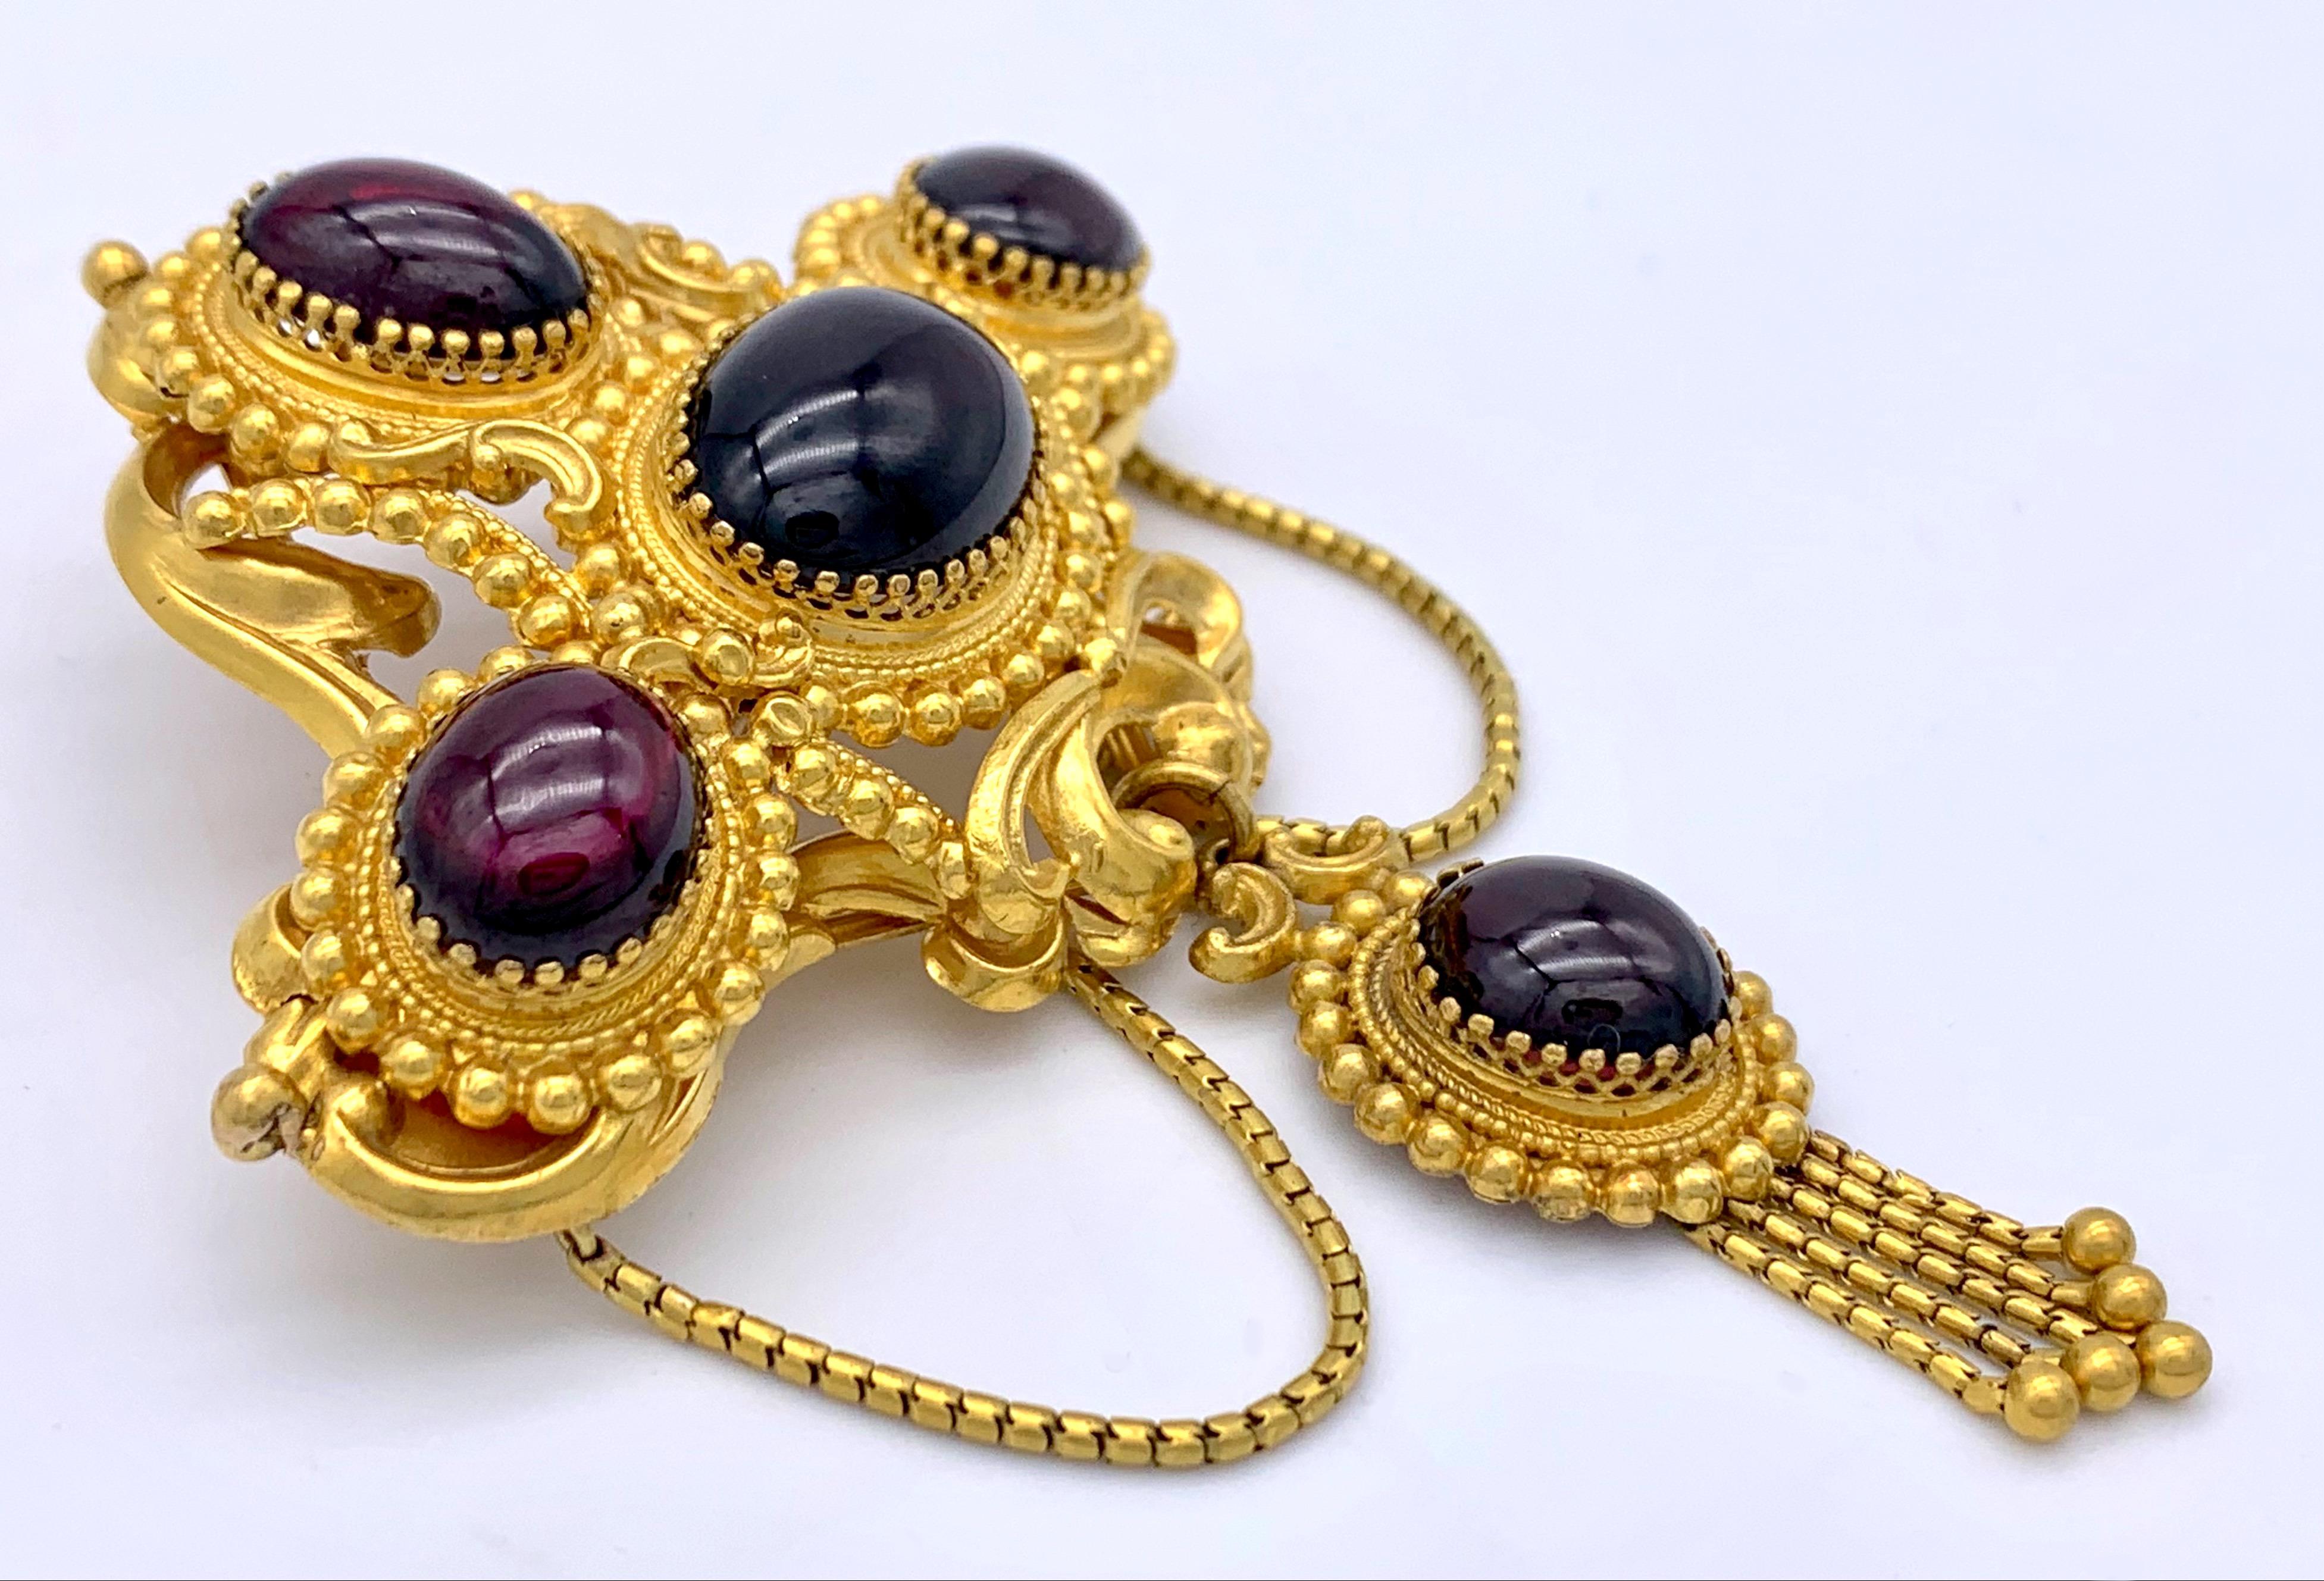 Absolute stunning example of a renaissance revival piece of jewellery executed around 1850 in 14 karat gold. The brooch is set with with 5  oval almandine garnet cabochons. Two gold chains and an articulated pendant with five dangling tassels,